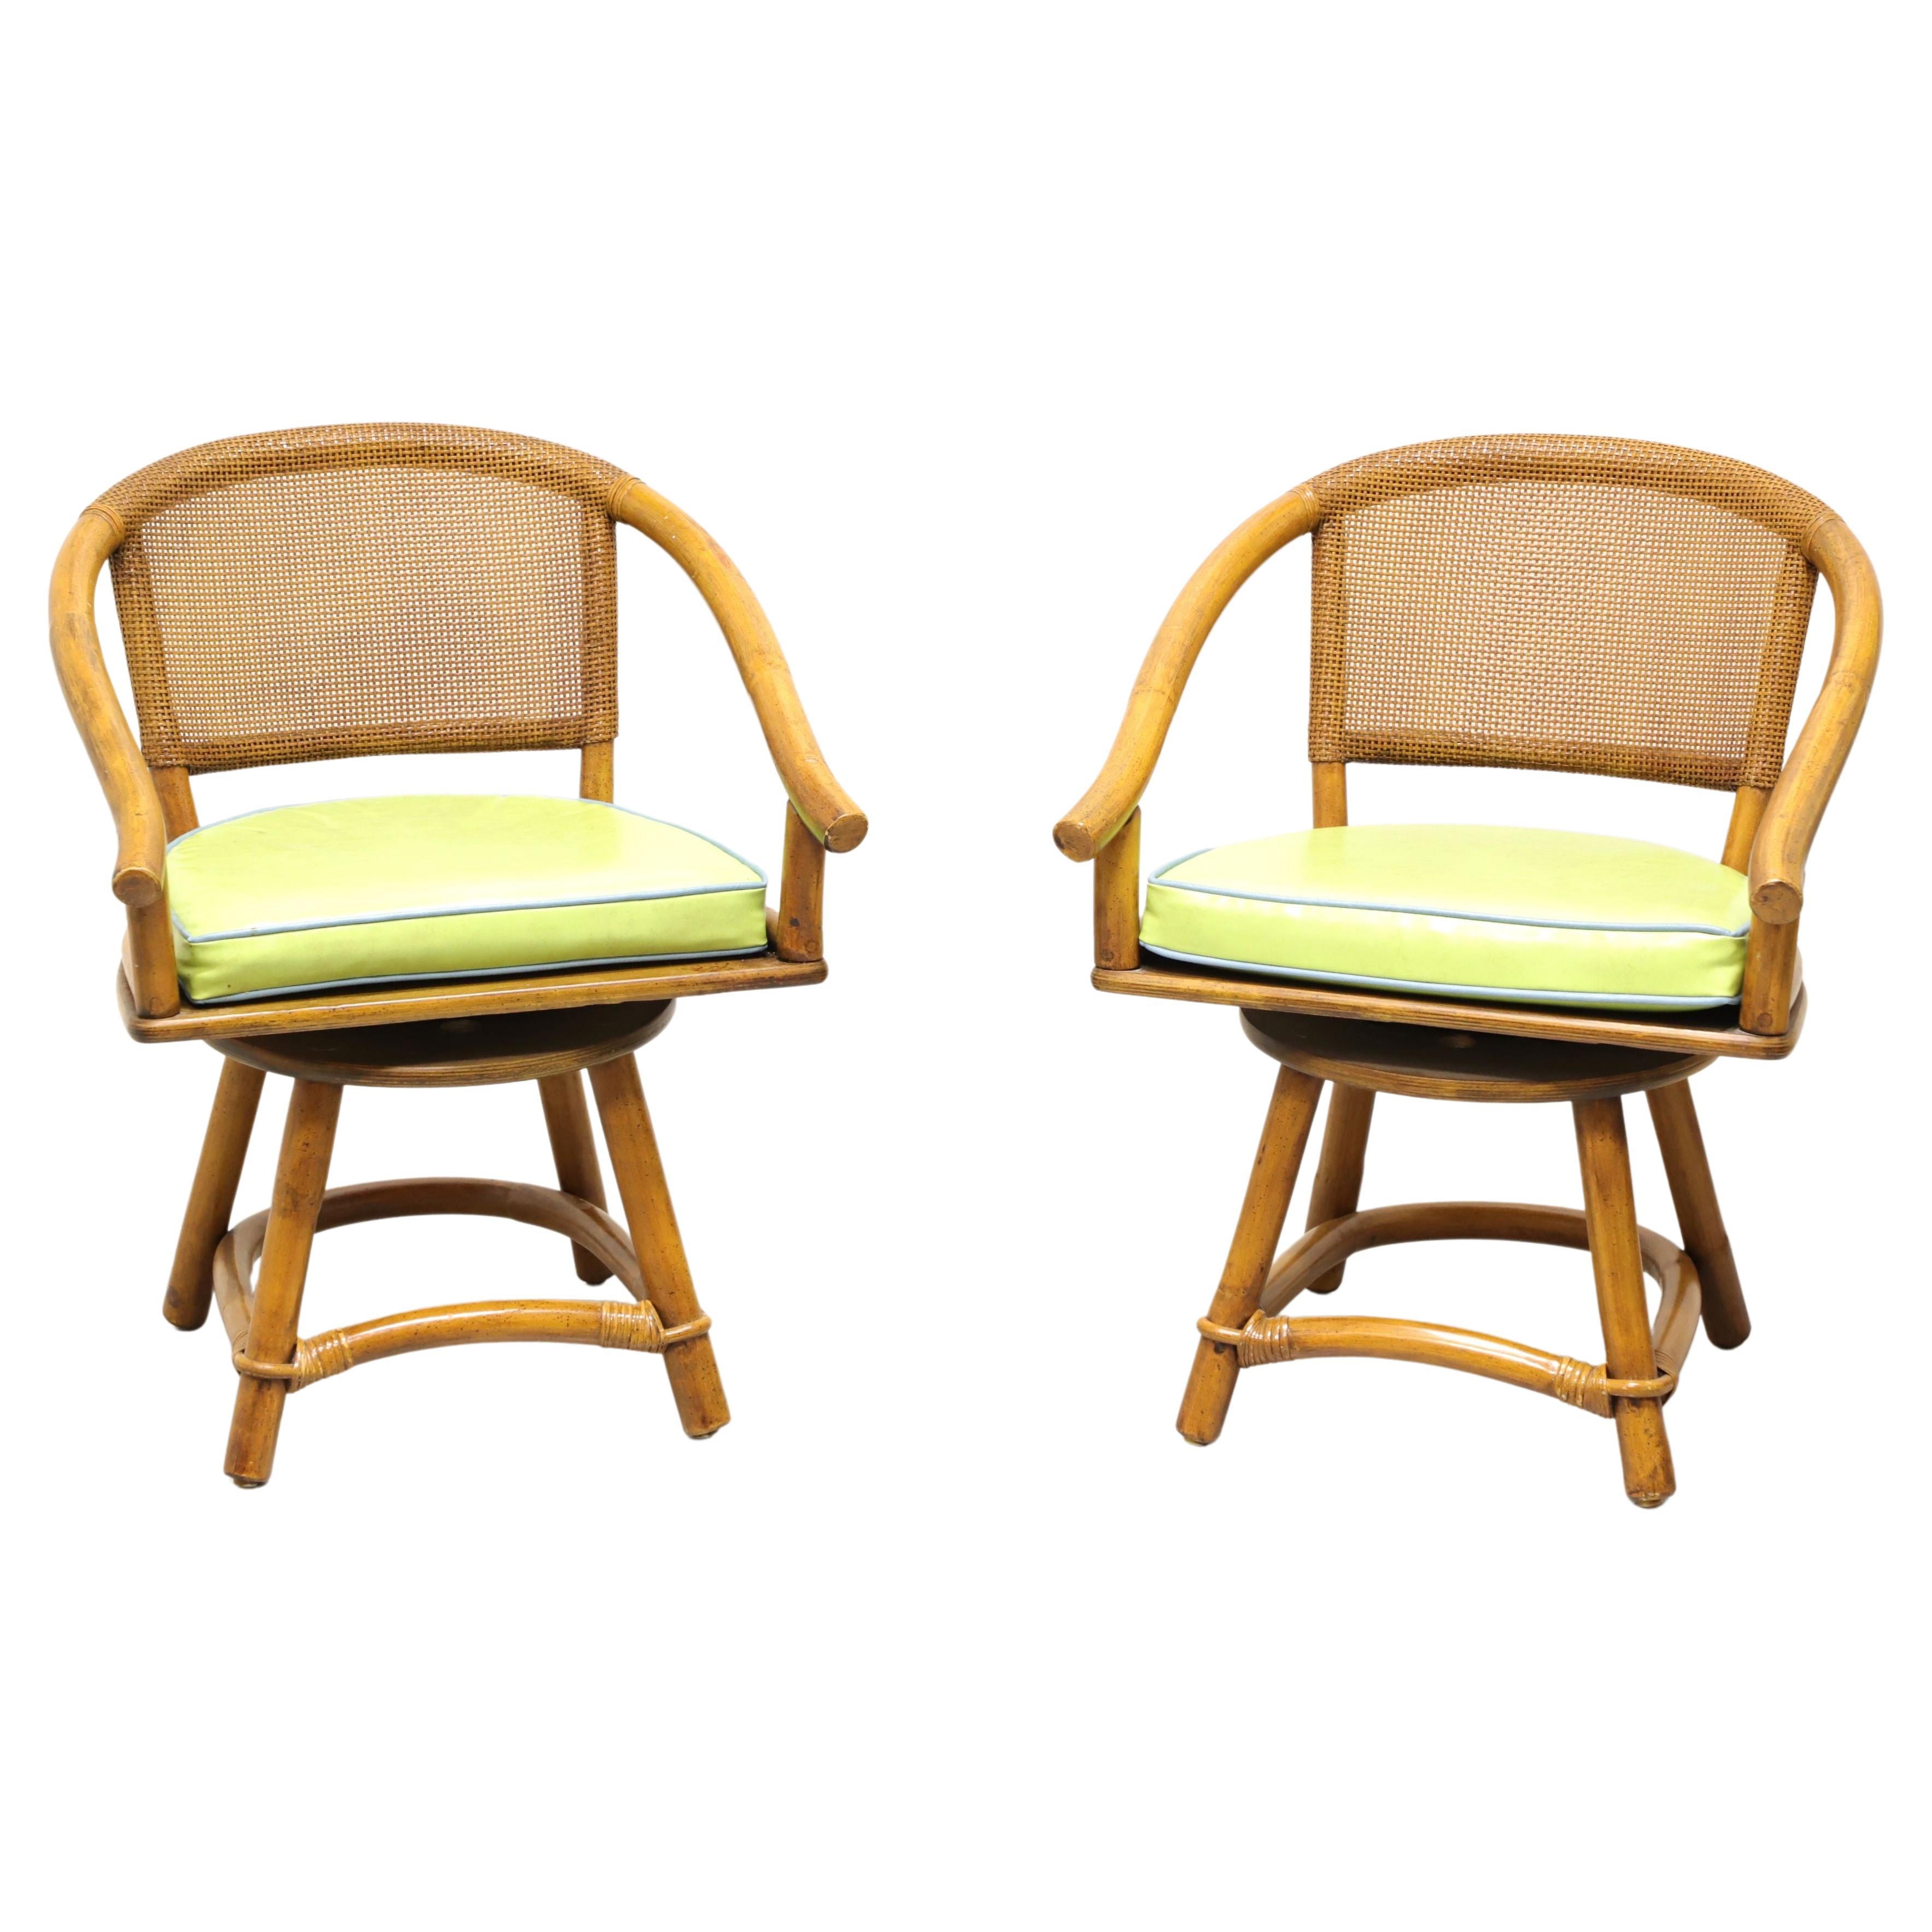 FICKS REED Mid 20th Century Faux Bamboo Rattan Swivel Chairs - Pair C